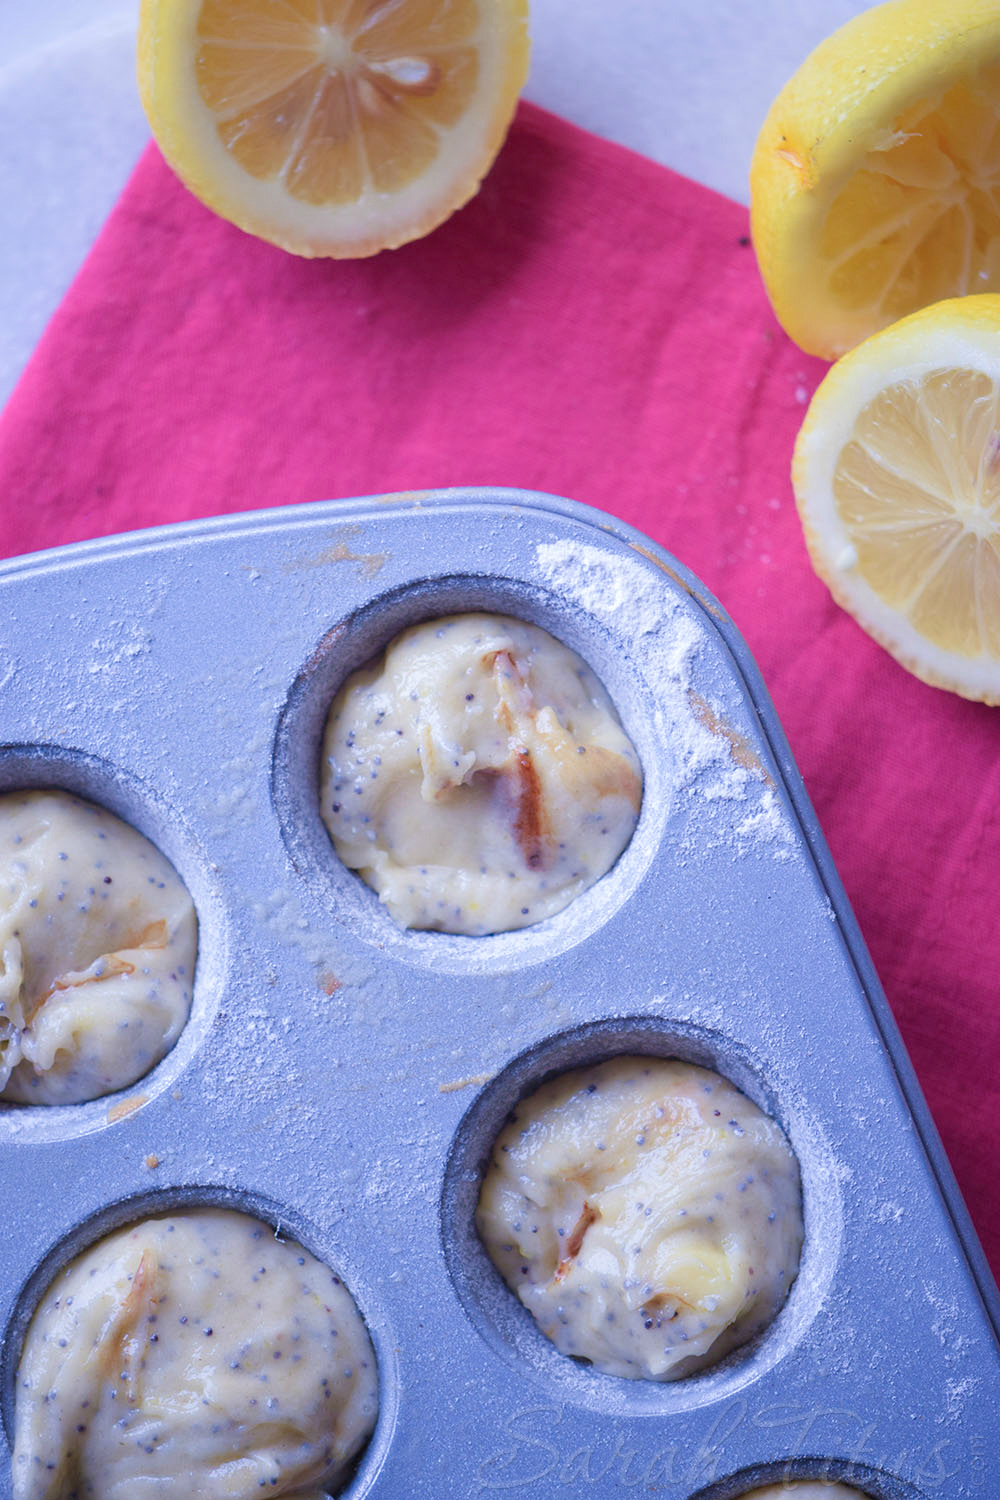 Muffin pan filled with lemon poppy batter sitting on a pink cloth napkin with fresh cut lemons on the side